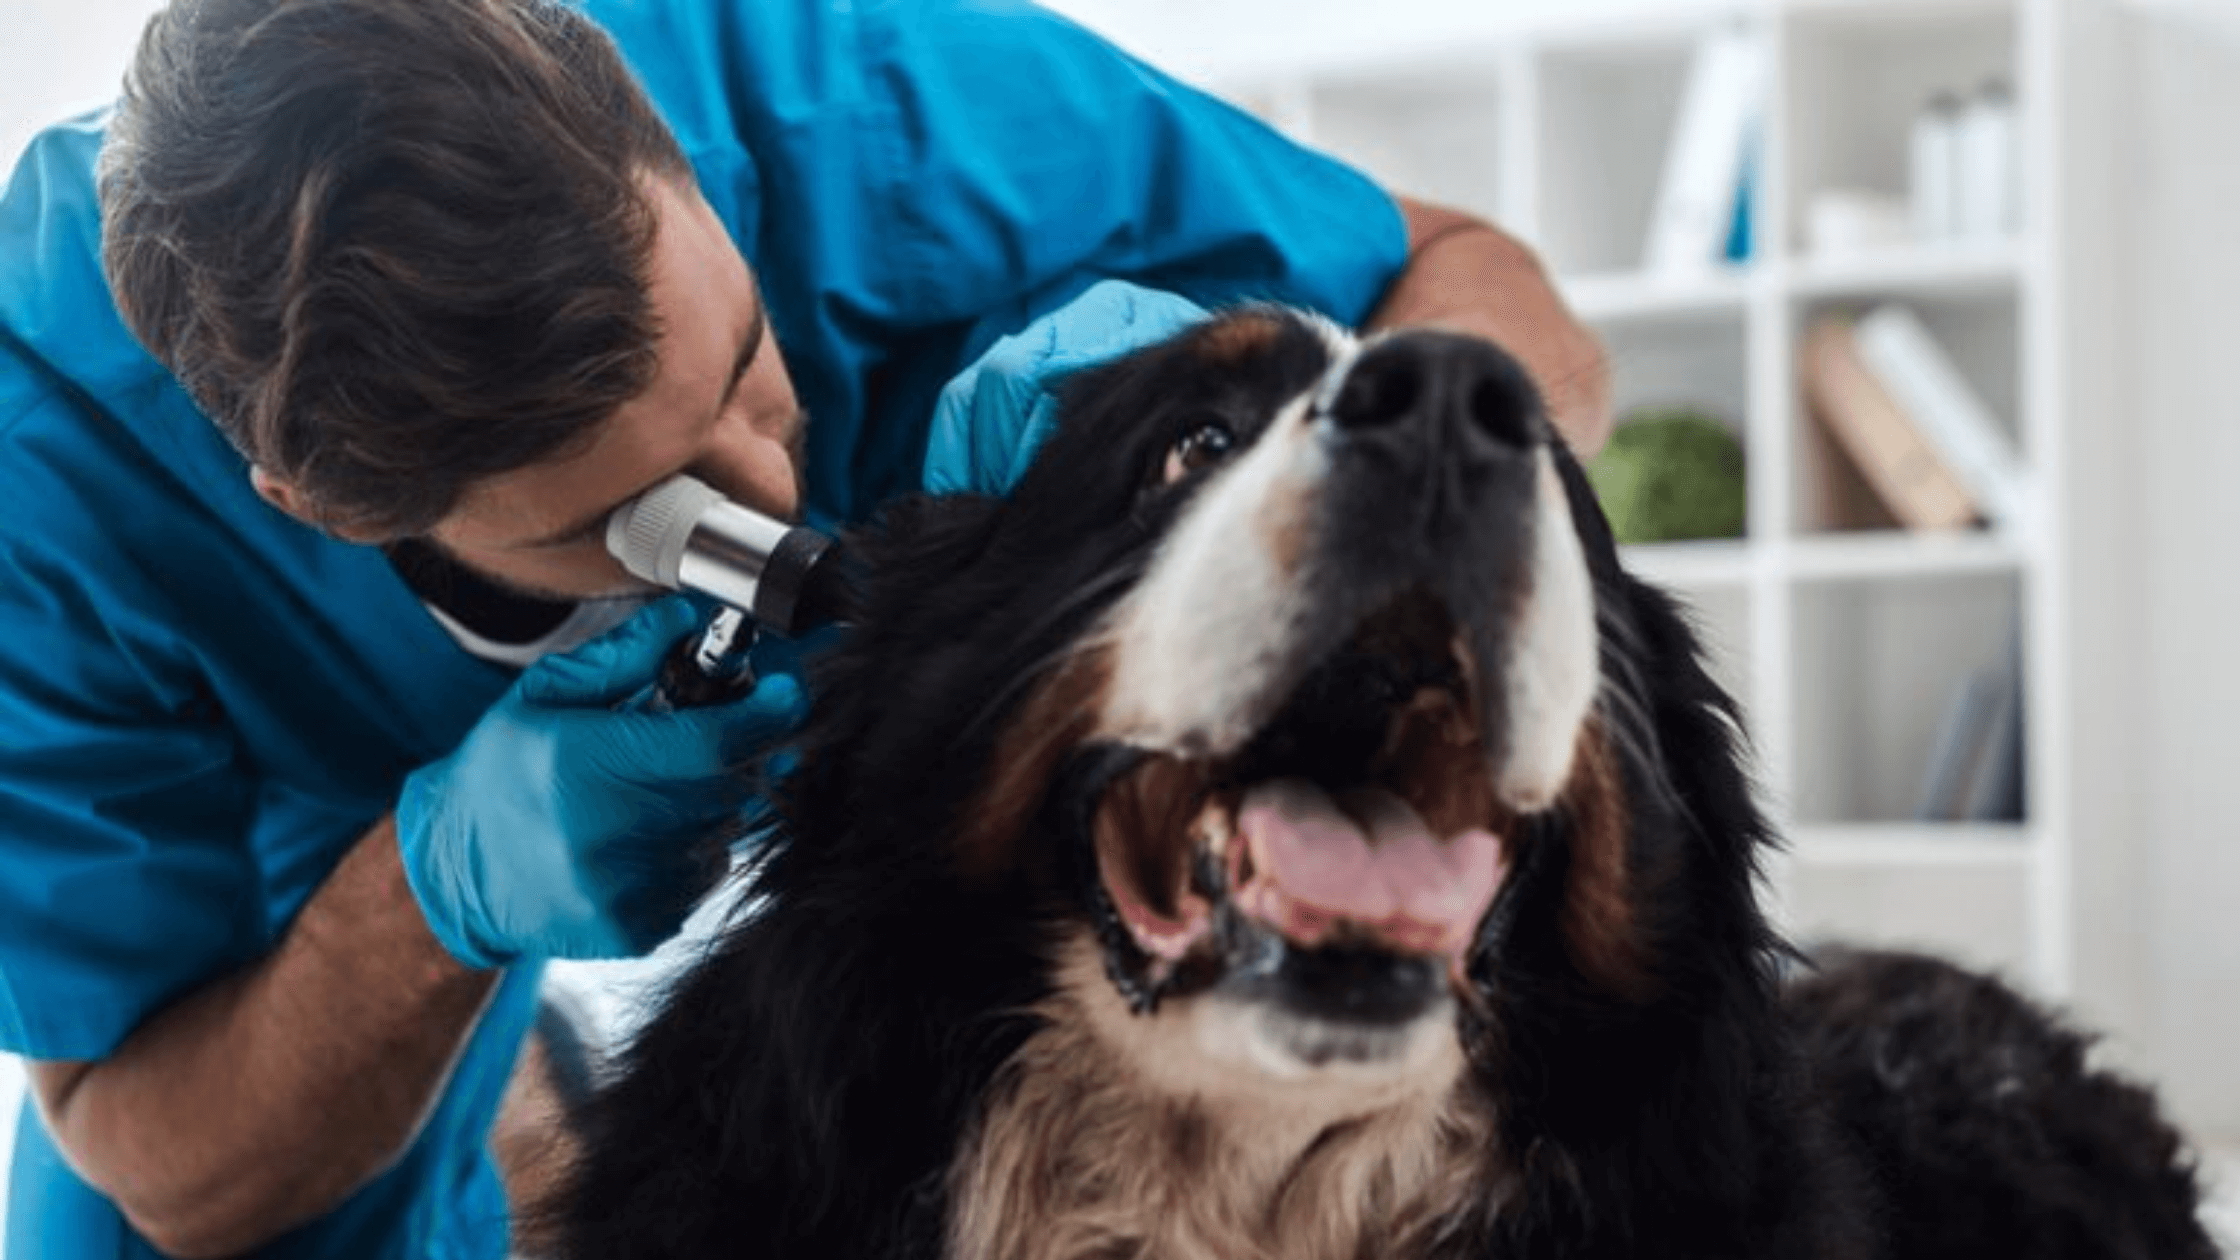 Veterinary clinic opening doors in Marietta Walmart with contact-free visits